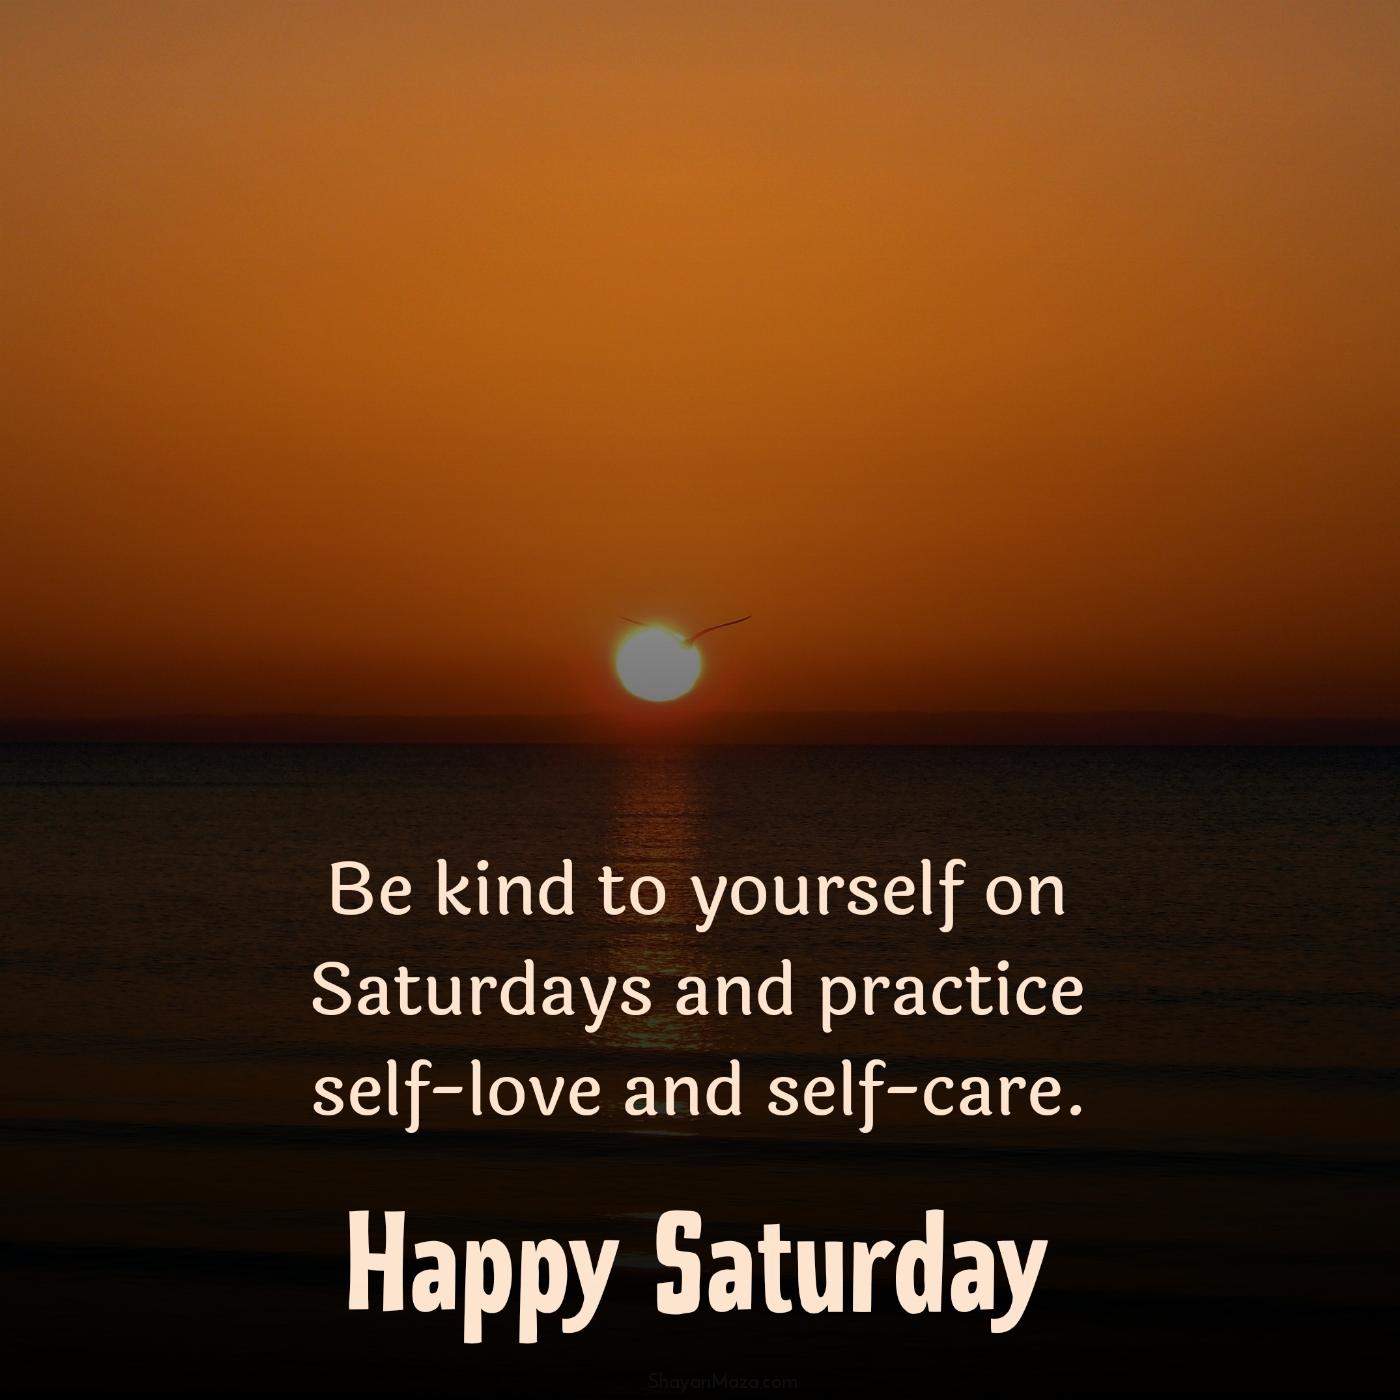 Be kind to yourself on Saturdays and practice self-love and self-care